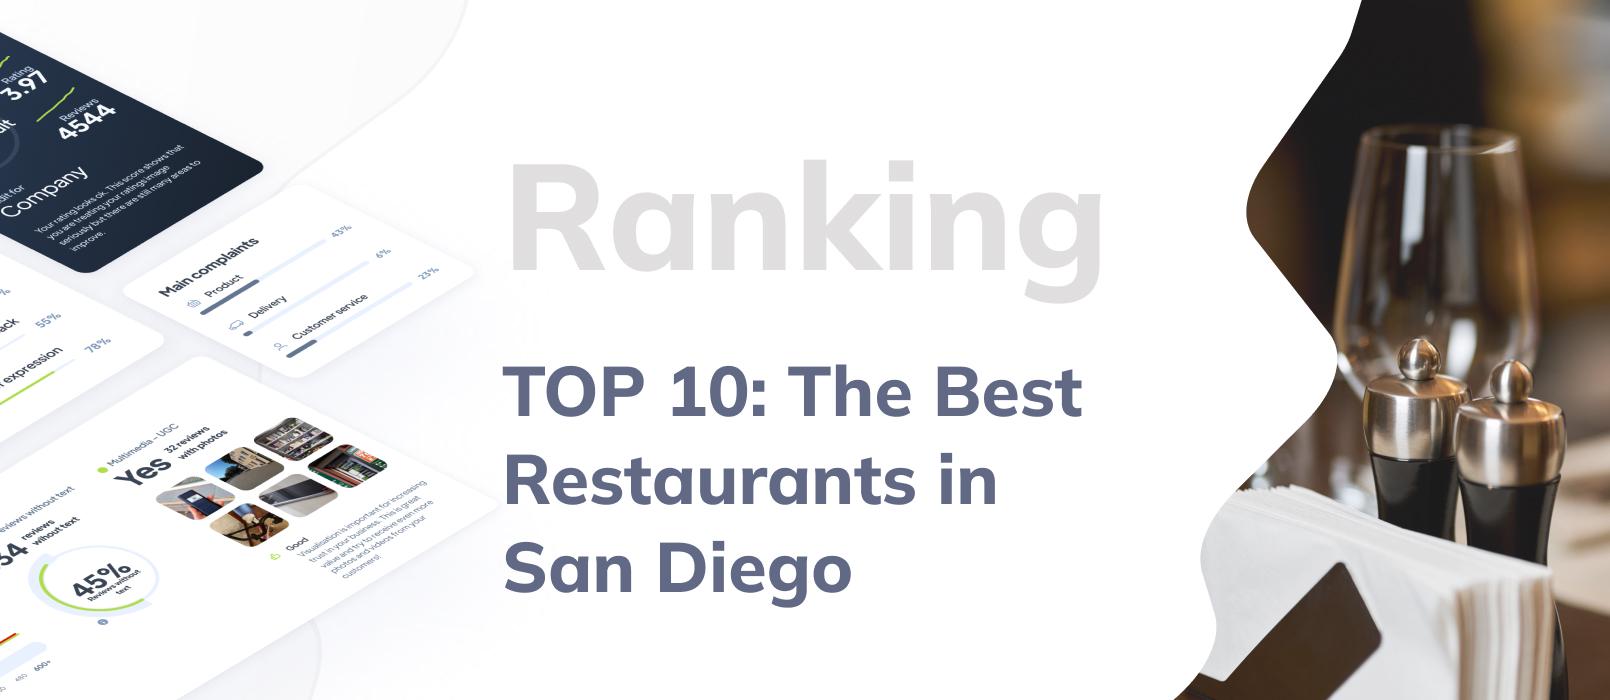 TOP 10 of the Best Restaurants in San Diego - Ranking Based on Google Reviews